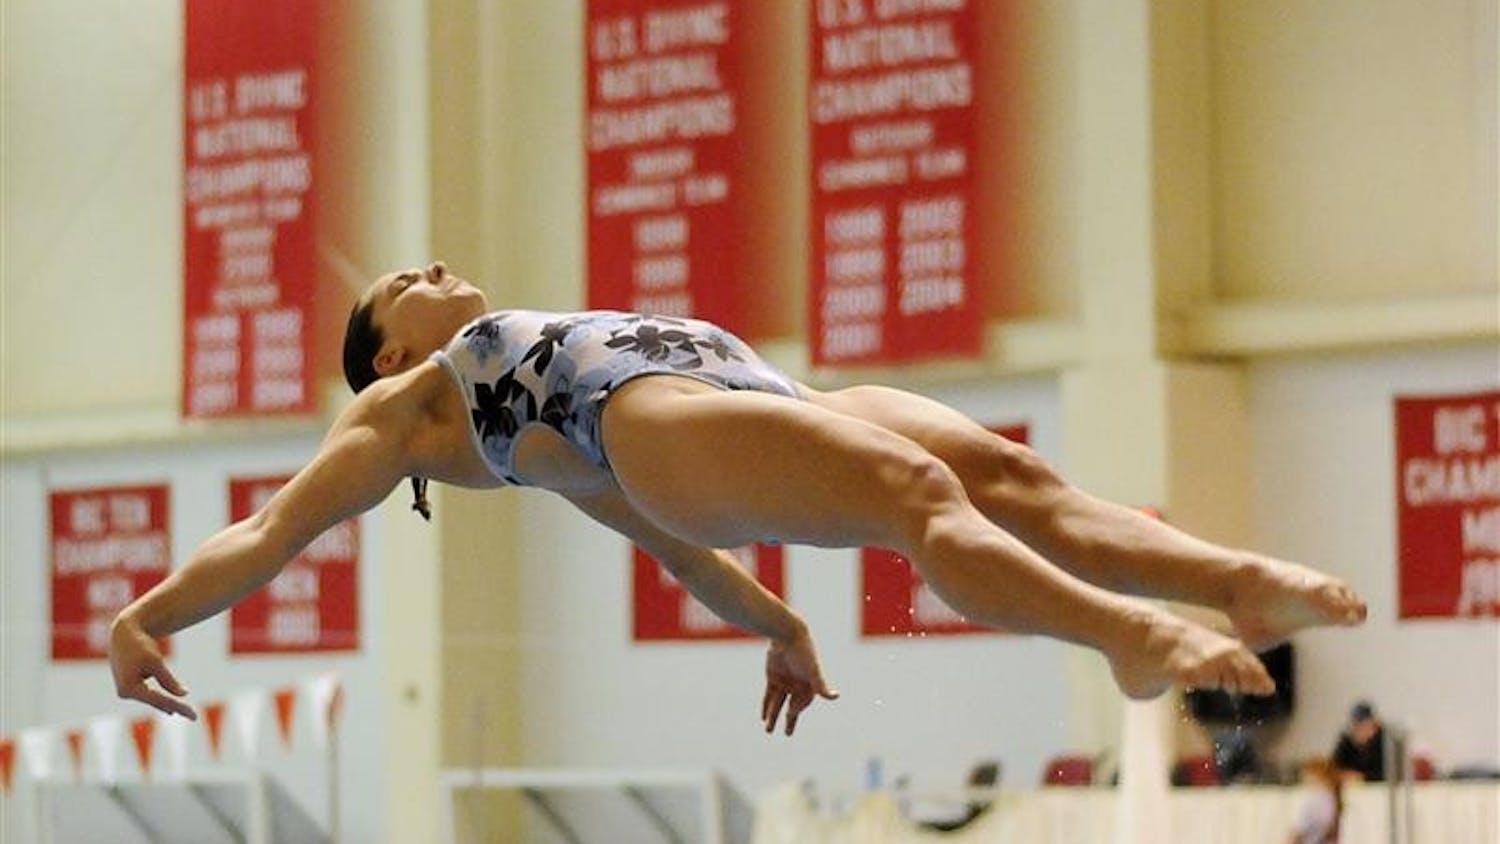 IU senior diver Christina Loukas practices a dive off of a one-meter springboard during a practice on Feb. 26, 2009 at the Counsilman-Billingsley Aquatic Center. Loukas was recently selected to the USA Diving 2009 World Championships team.